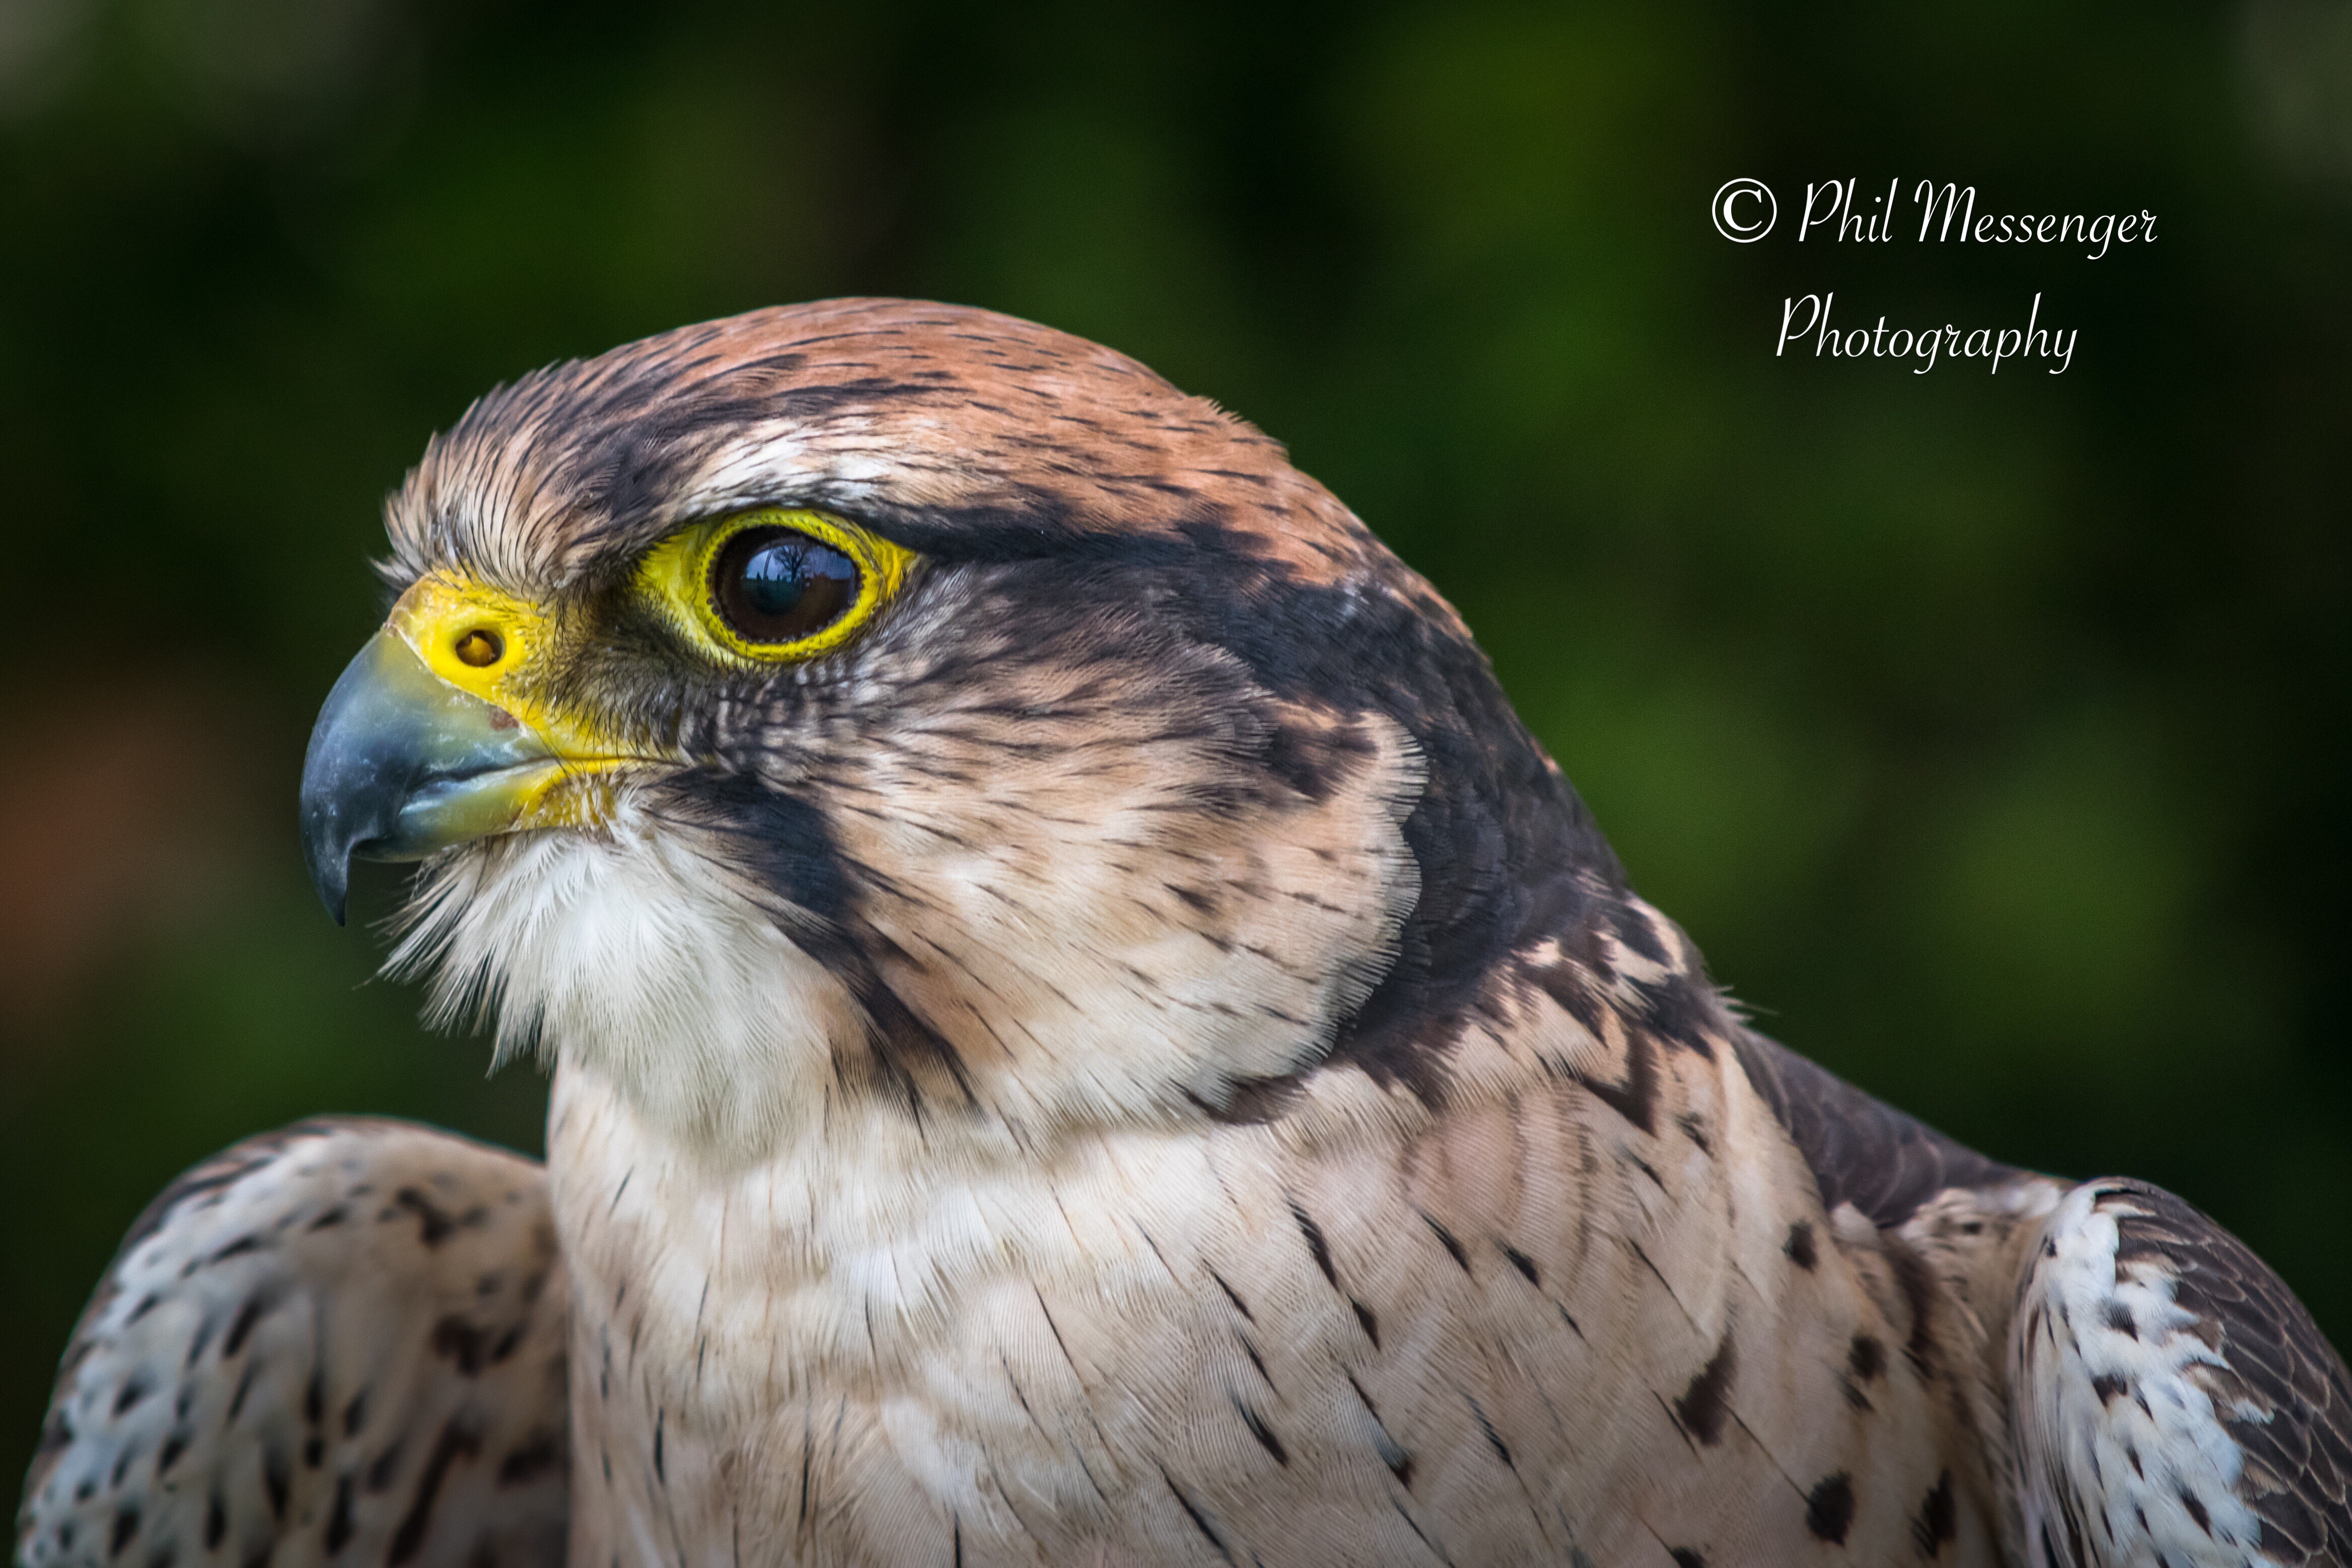 A Lanner falcon taken at Cotswold wildlife park, displayed by Cotswold Falconry.